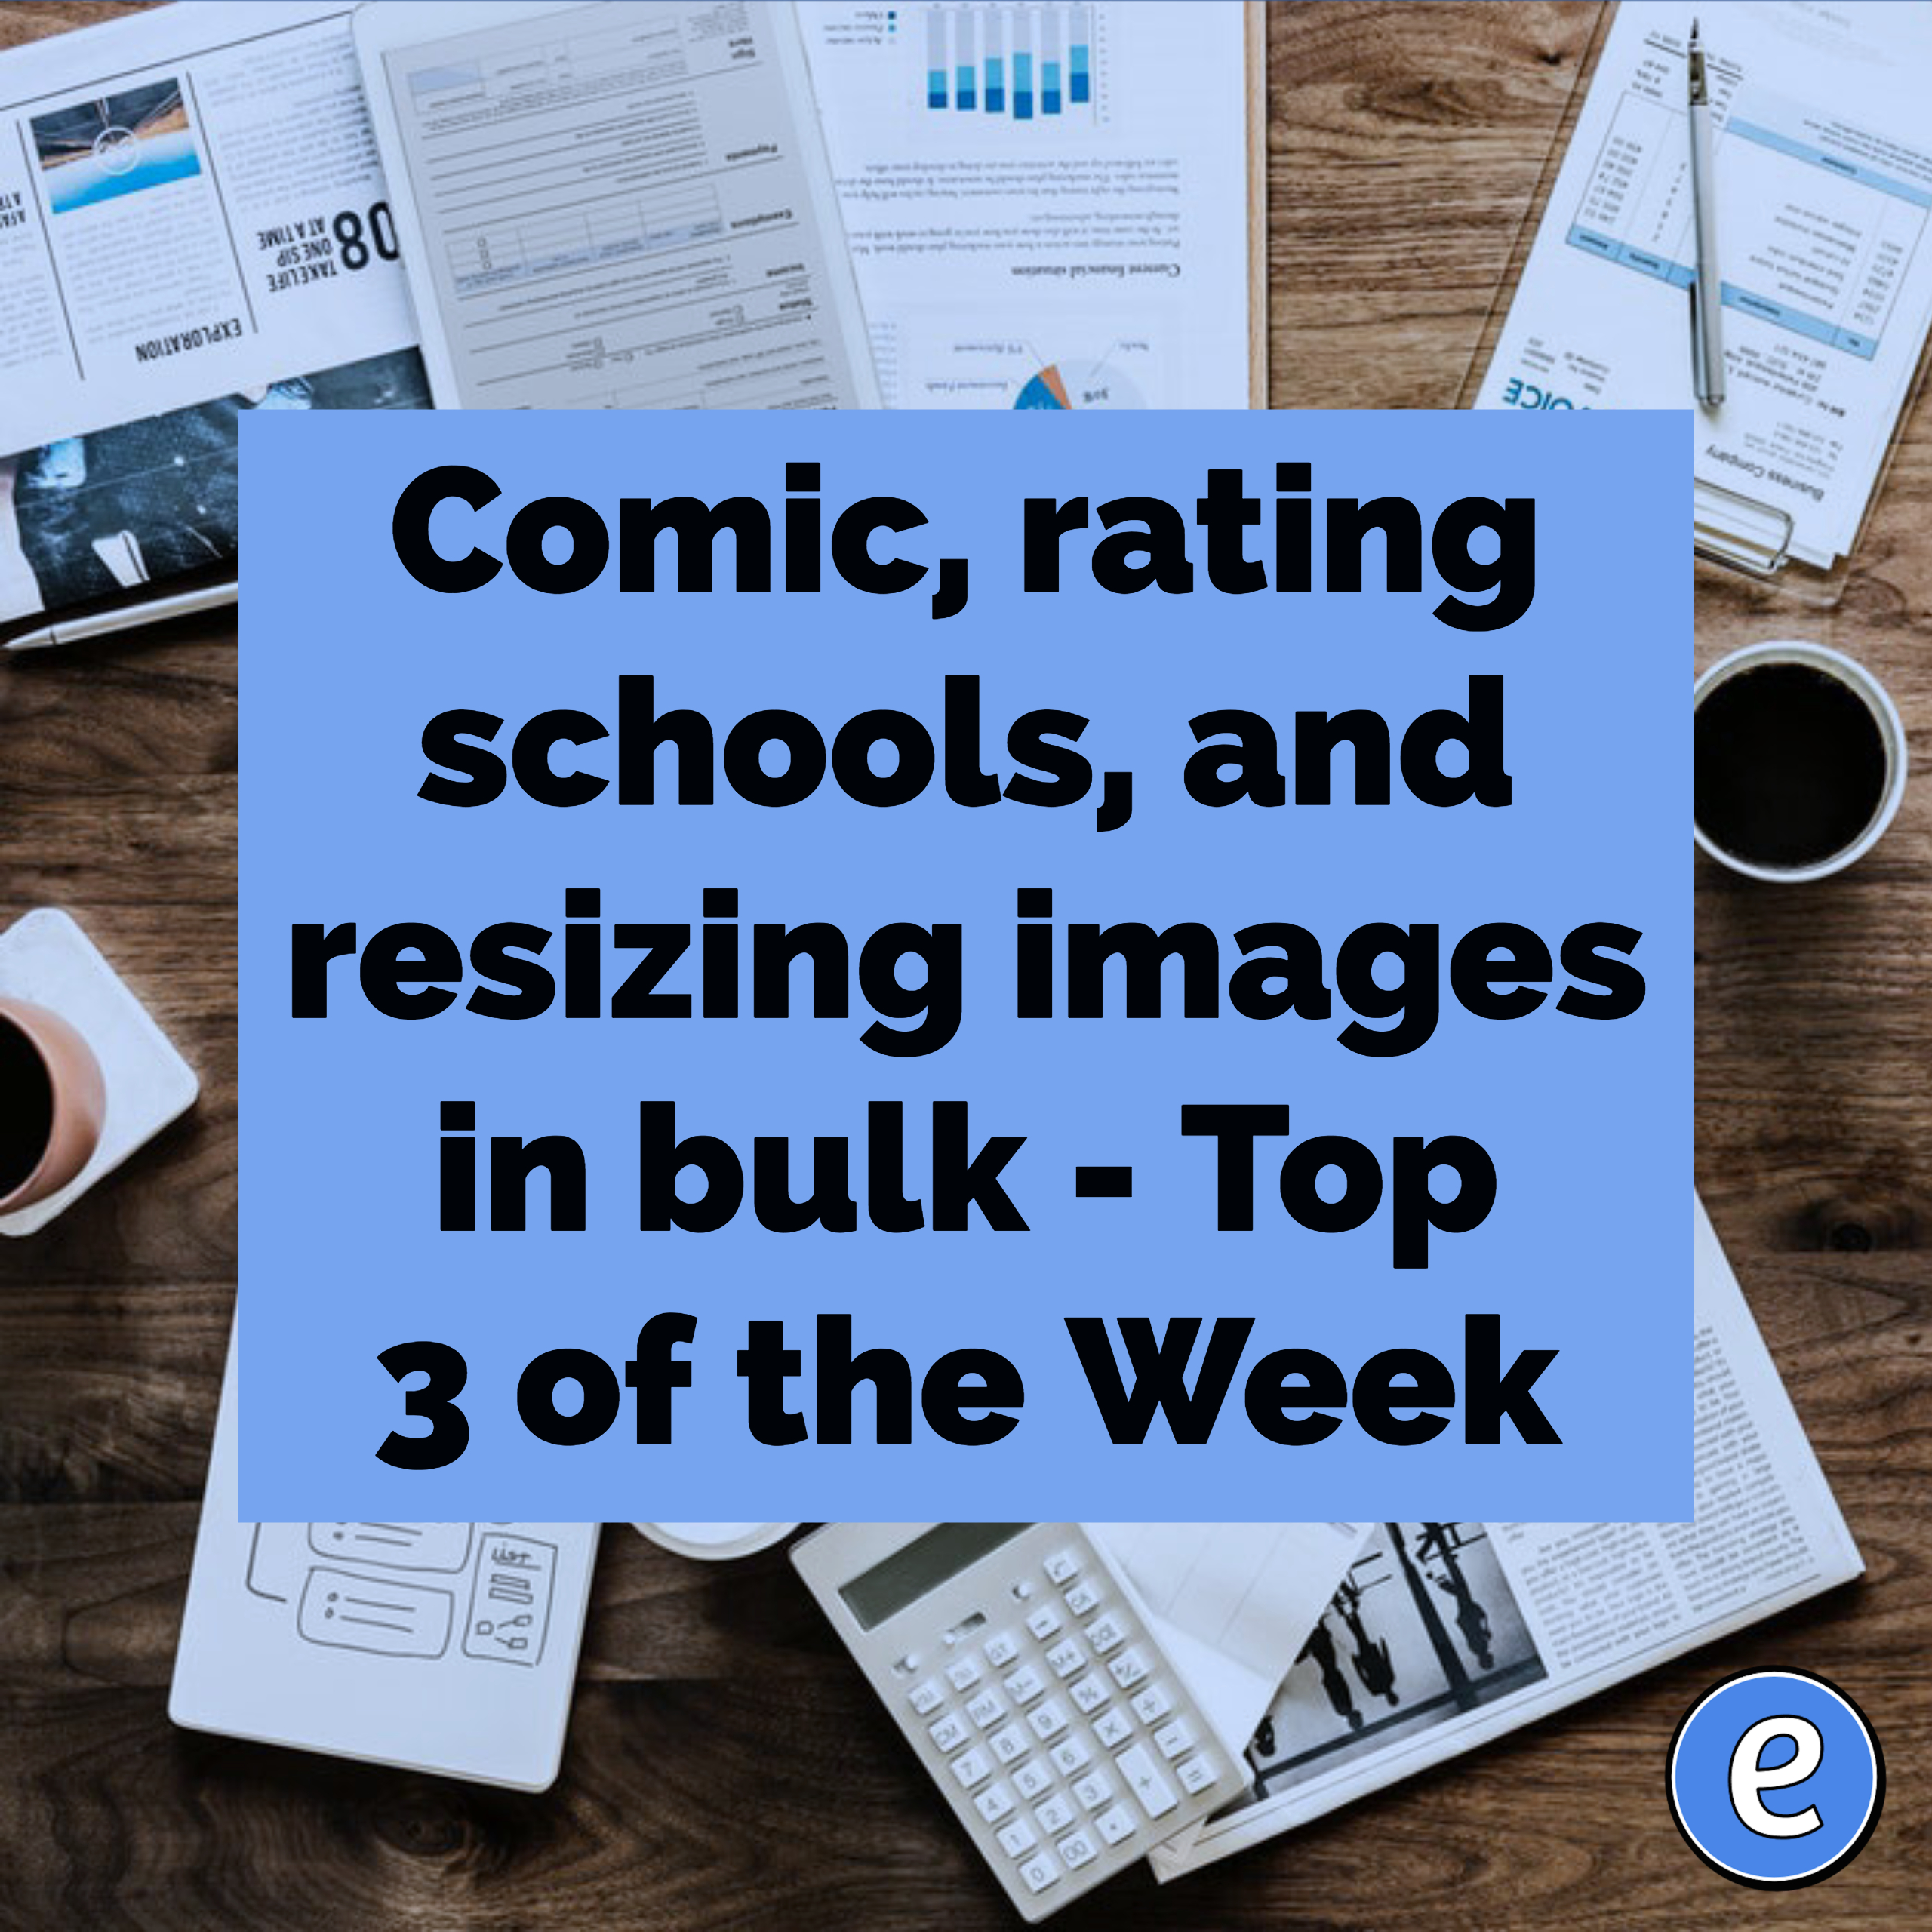 Comic, rating schools, and resizing images in bulk – Top 3 of the Week